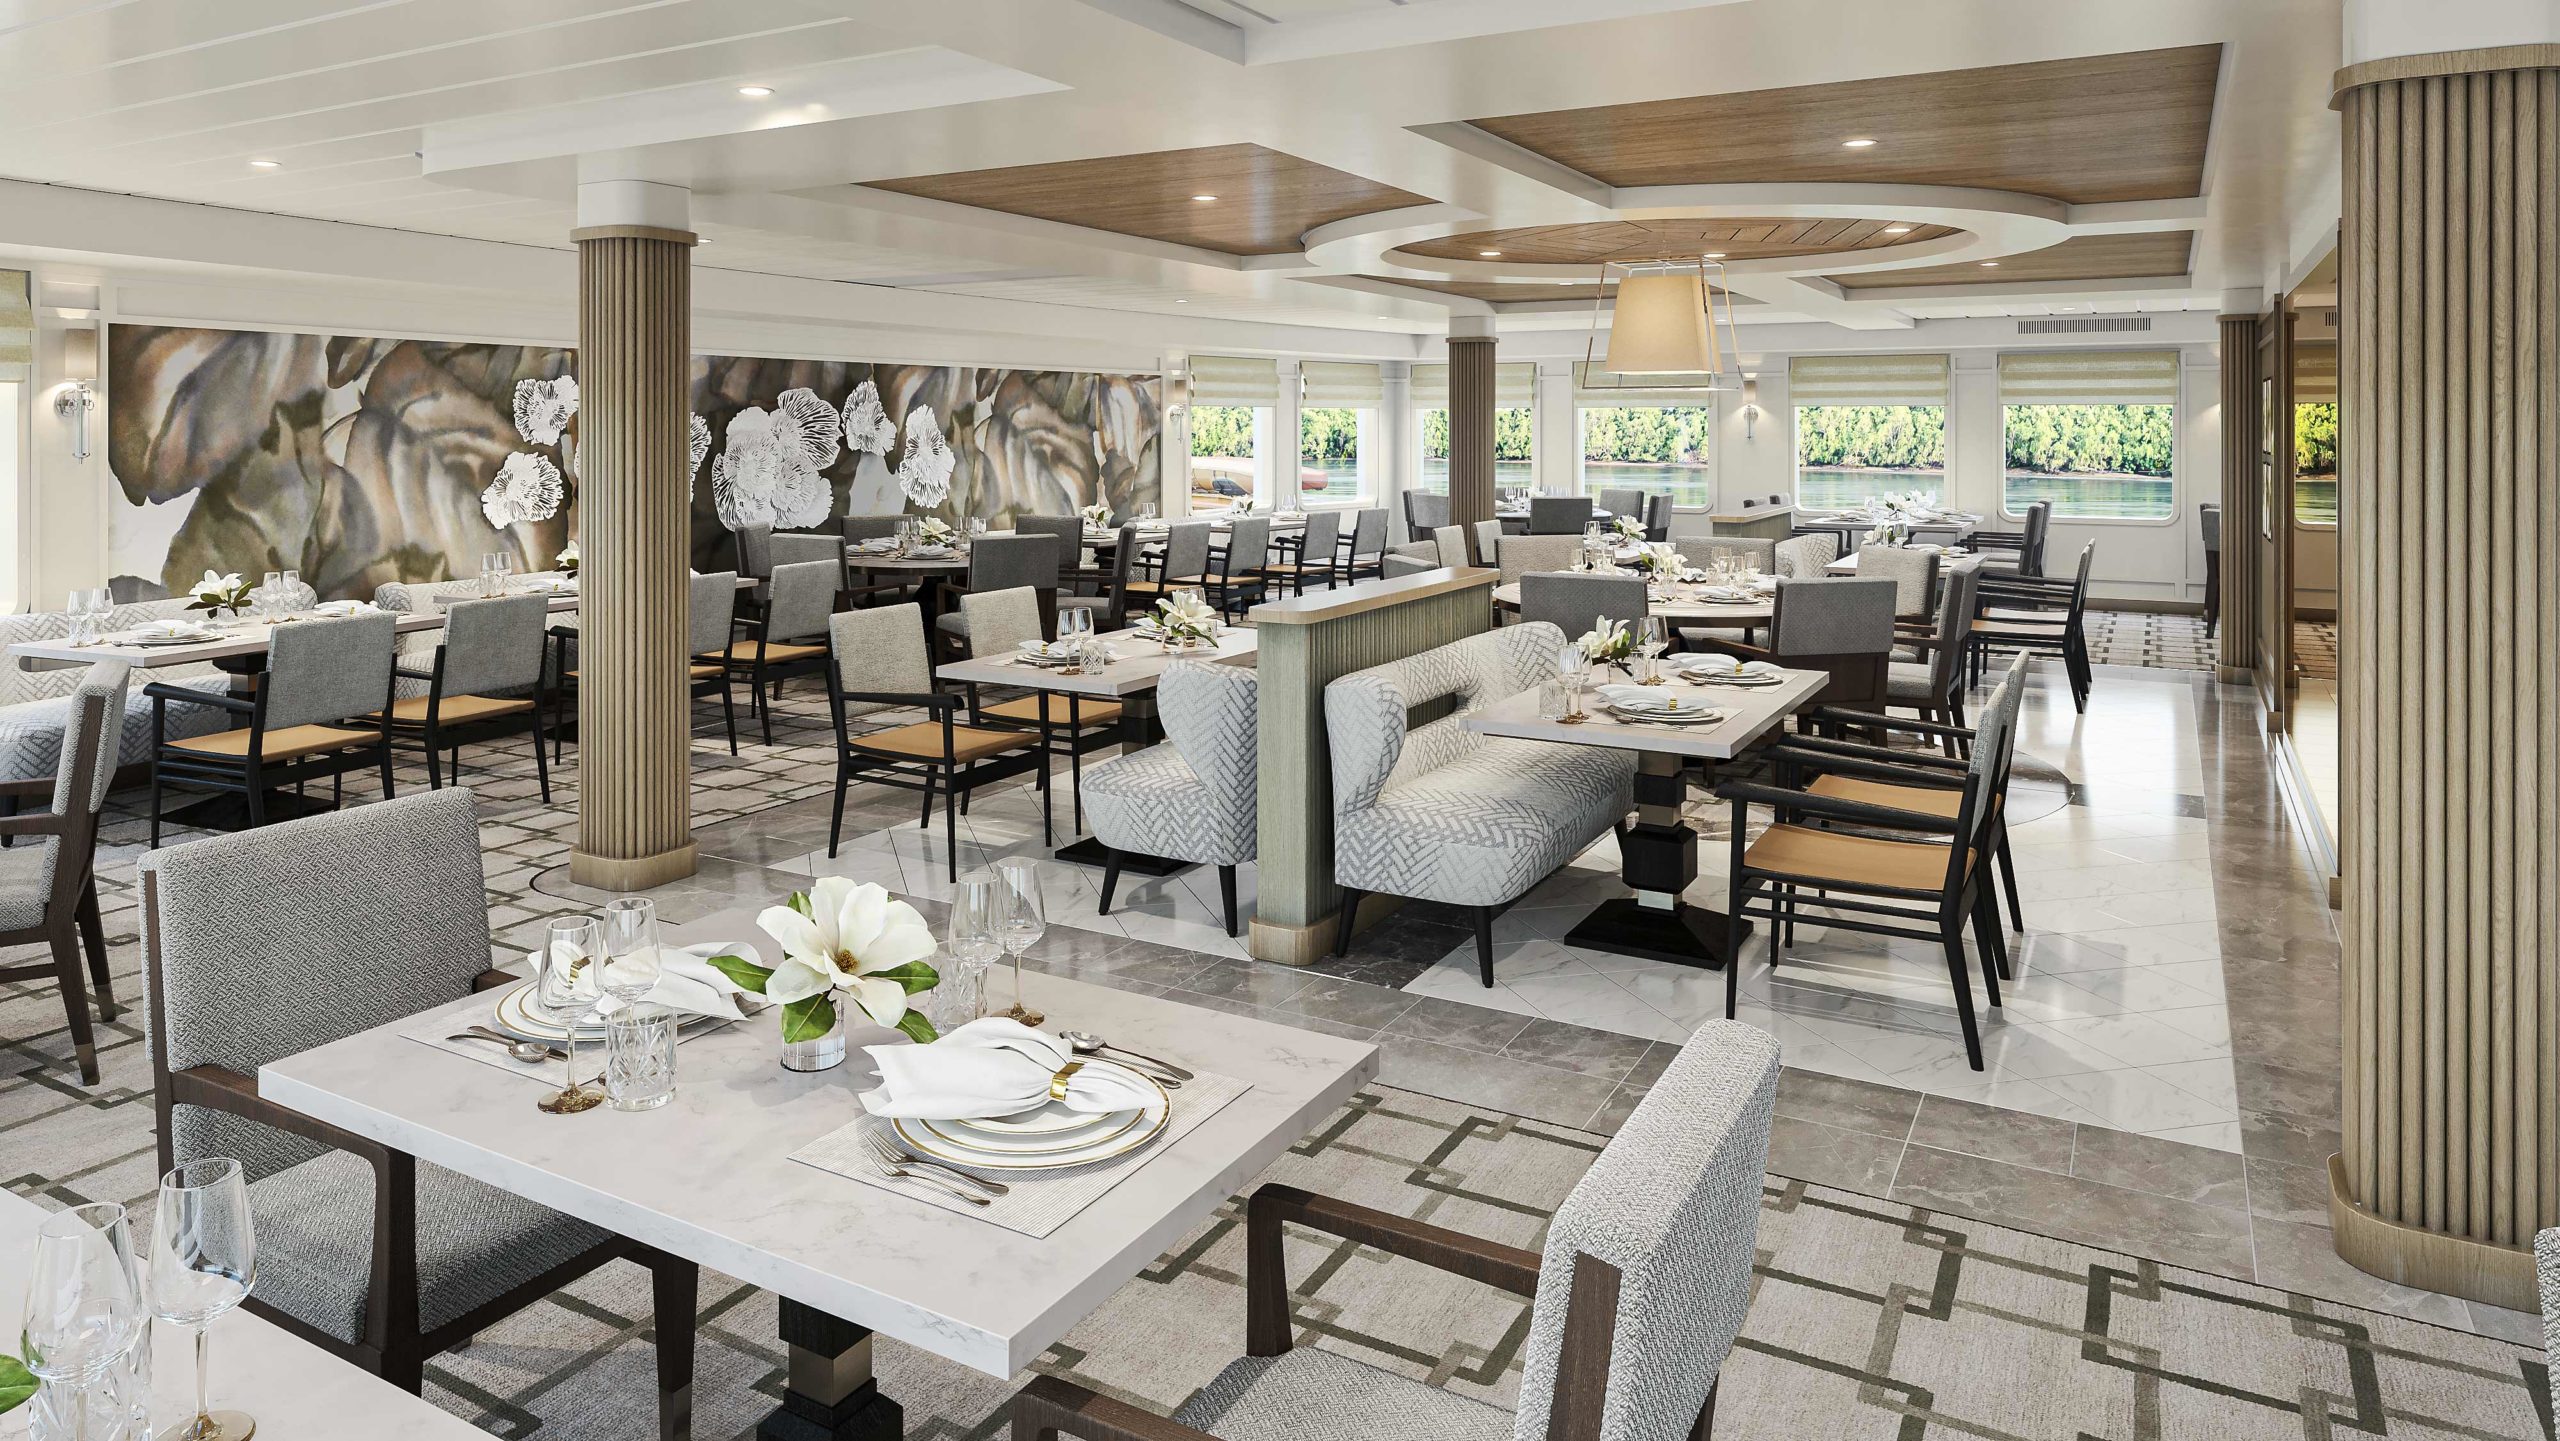 Small ship cruise highlights include the elegant restaurant on American Cruise Lines' new American Eagle